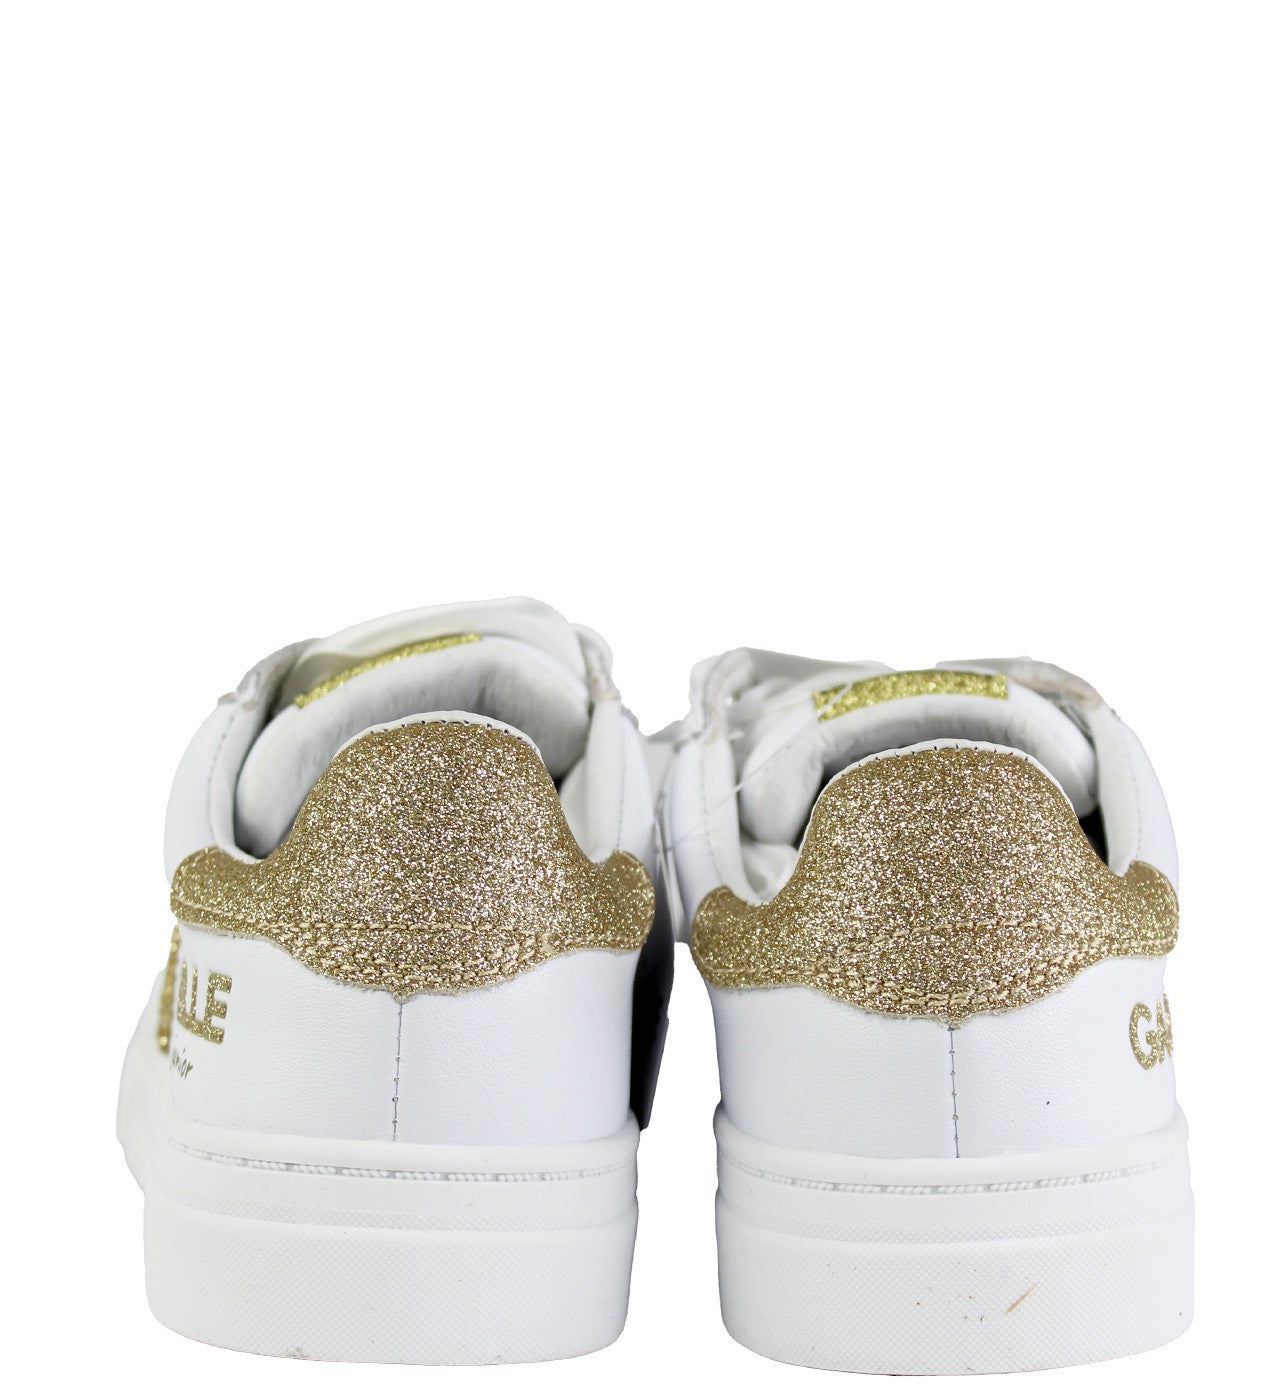 GAËLLE PARIS junior Sneakers Bambina Candy. Bianco/Platino. GS0021L